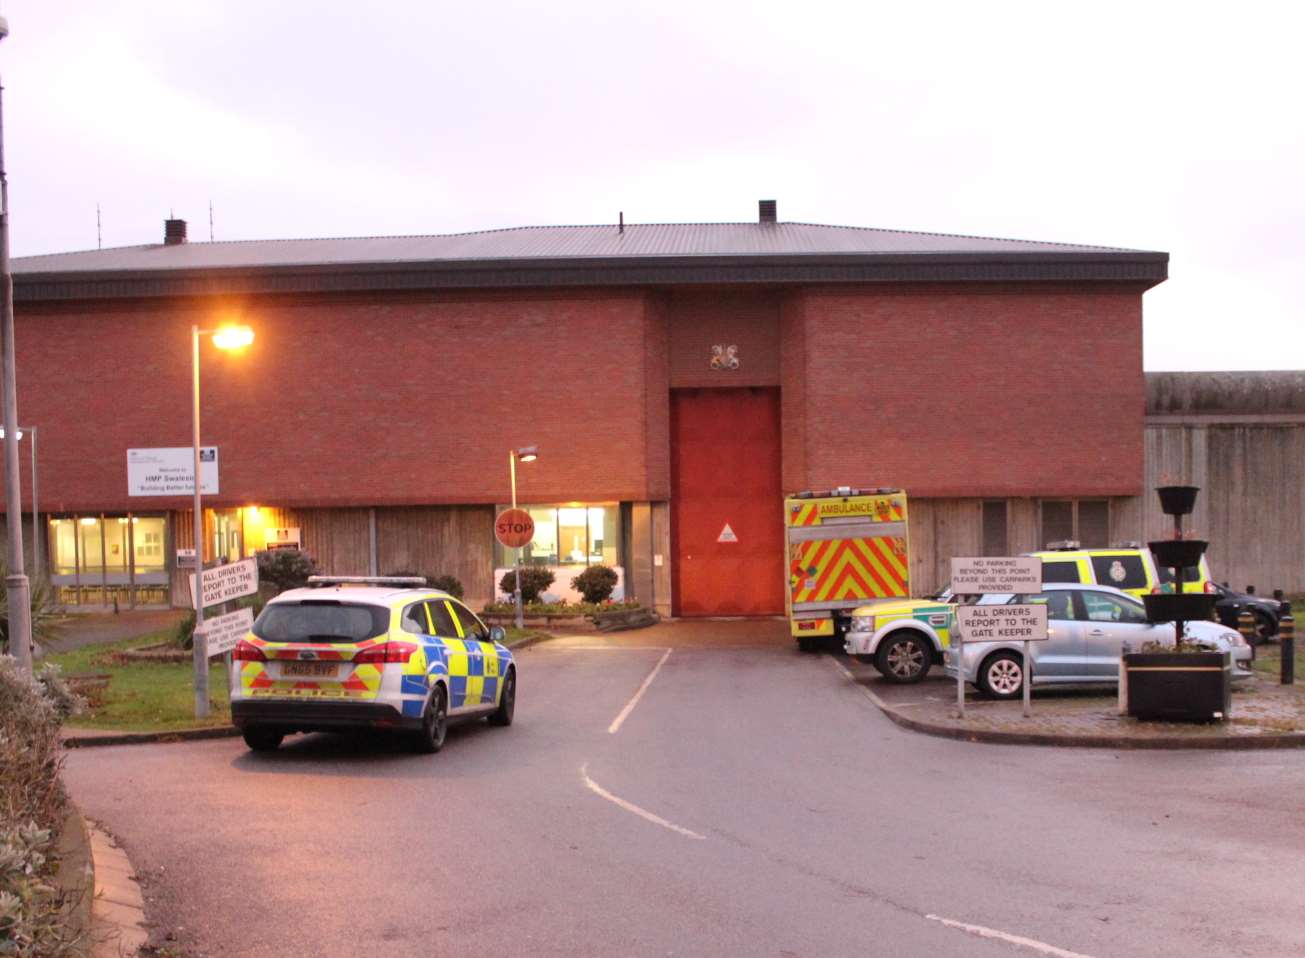 The entrance at Swaleside Prison, Sheppey, today